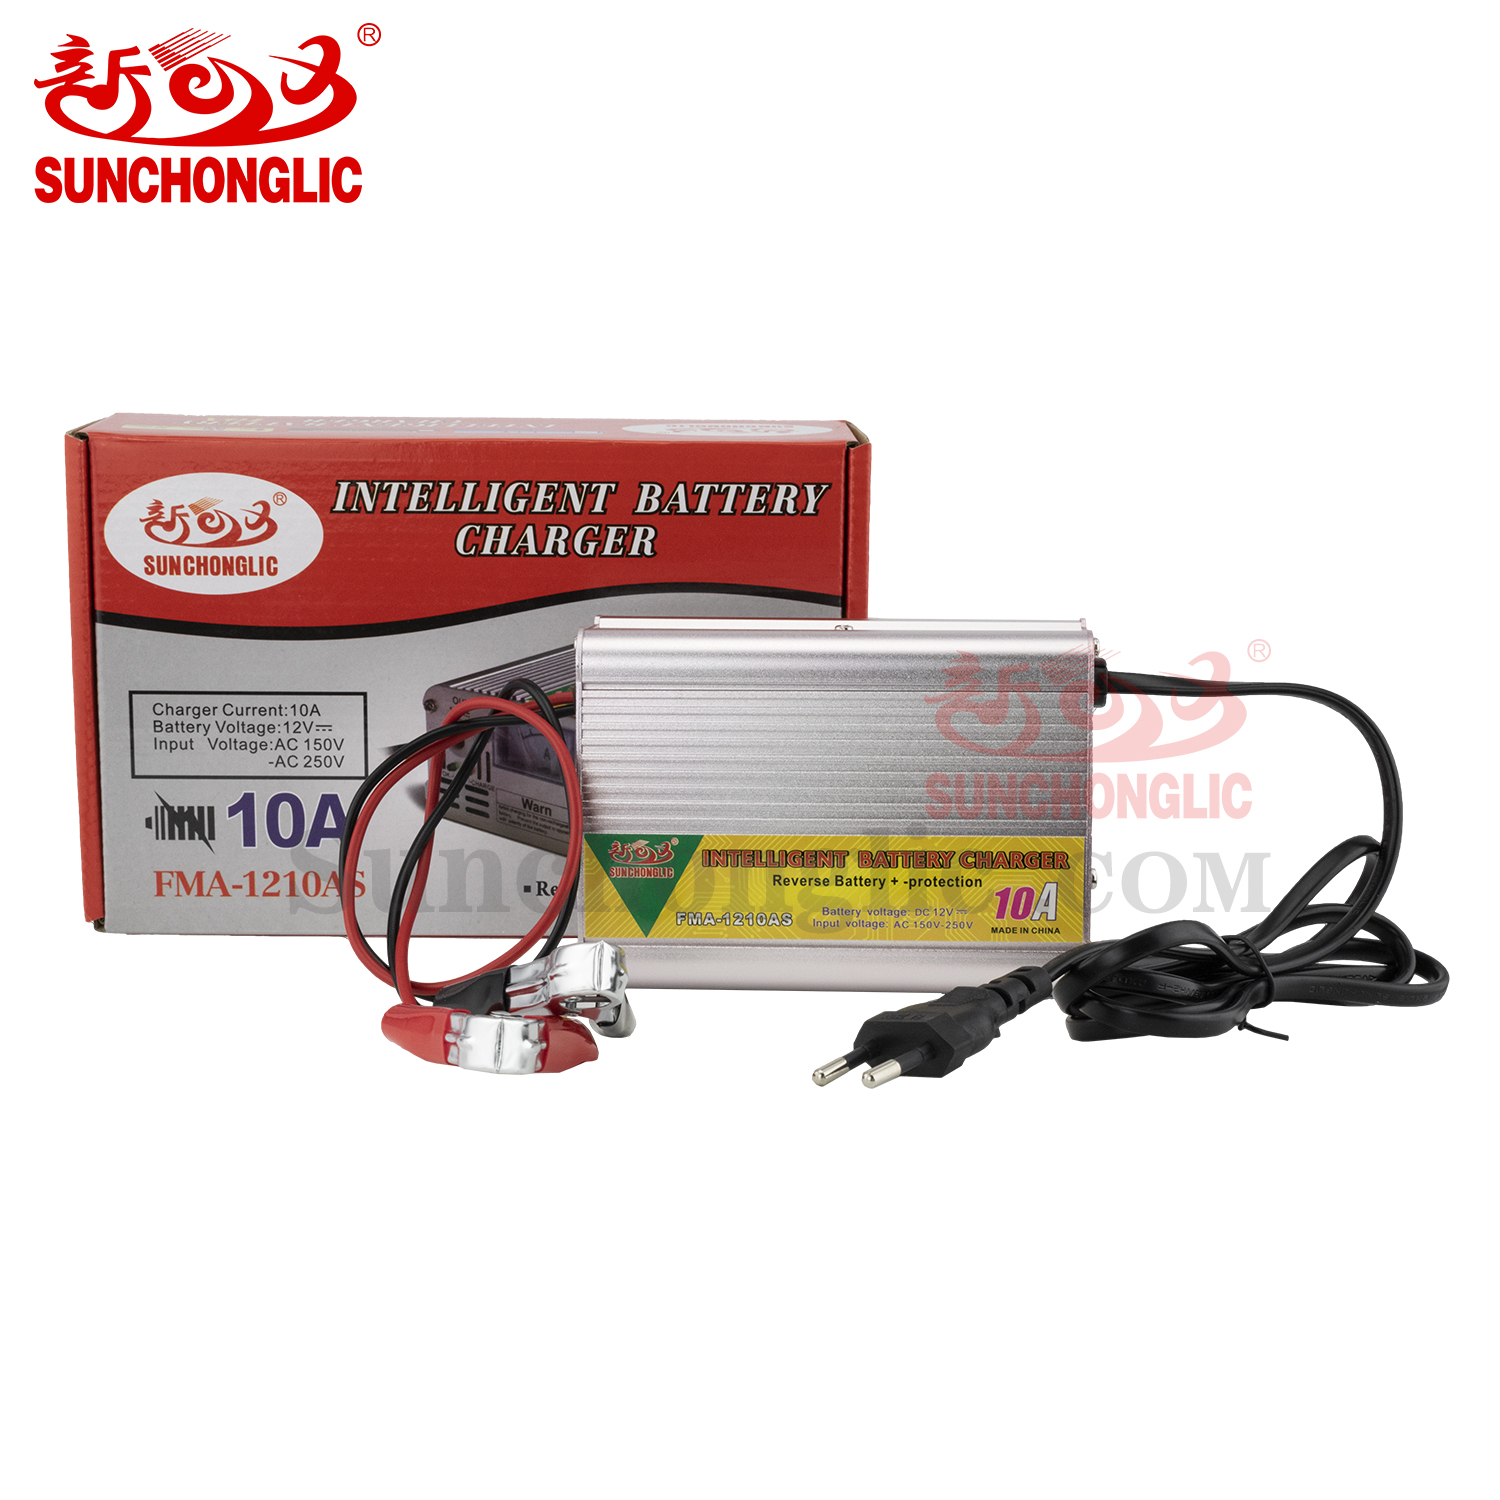 AGM/GEL Battery Charger - FMA-1210AS